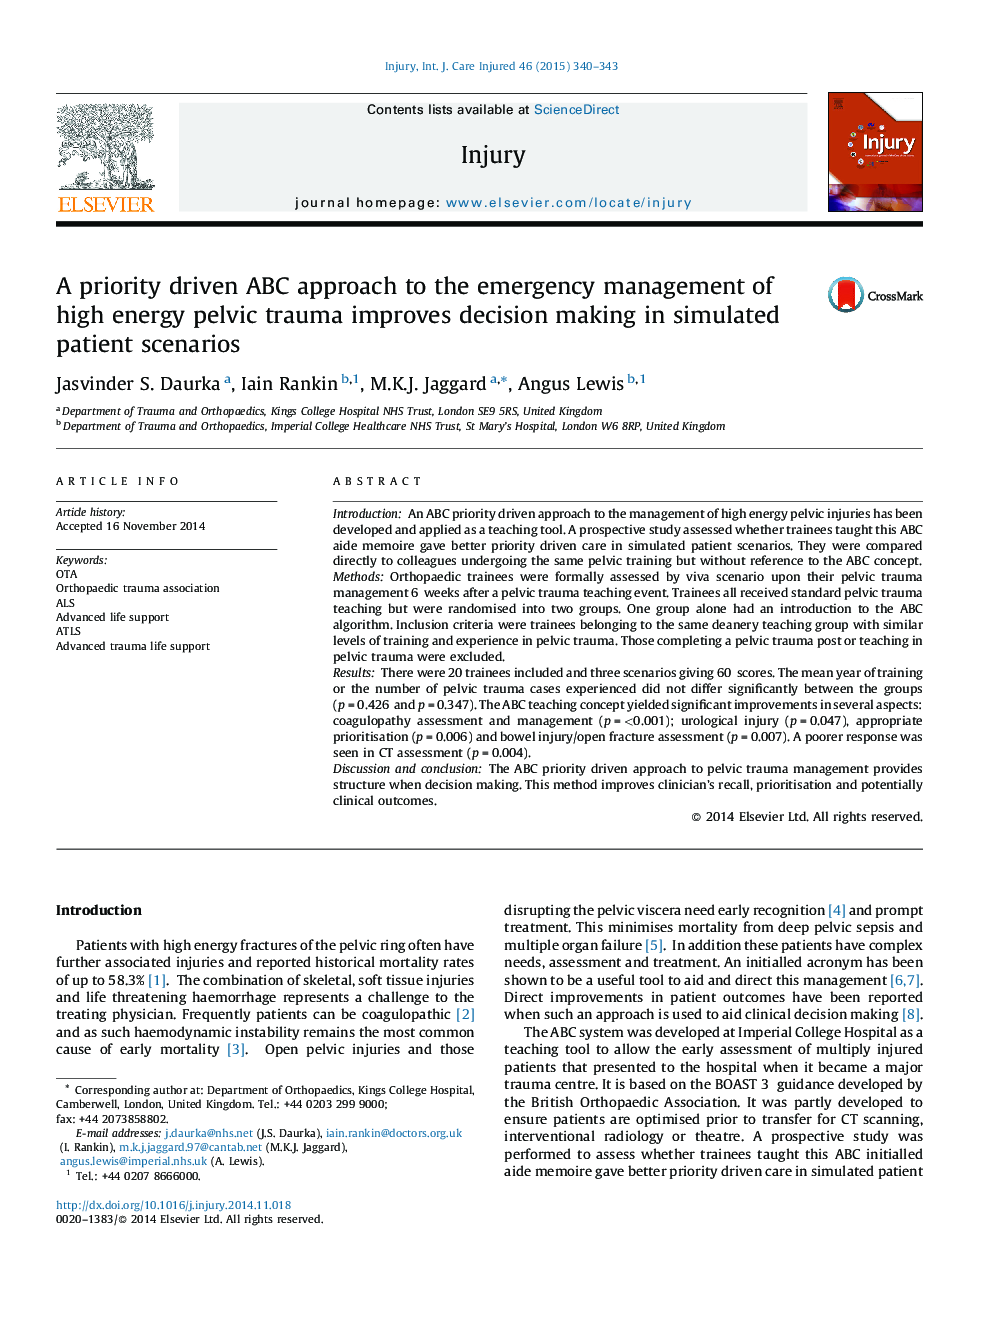 A priority driven ABC approach to the emergency management of high energy pelvic trauma improves decision making in simulated patient scenarios